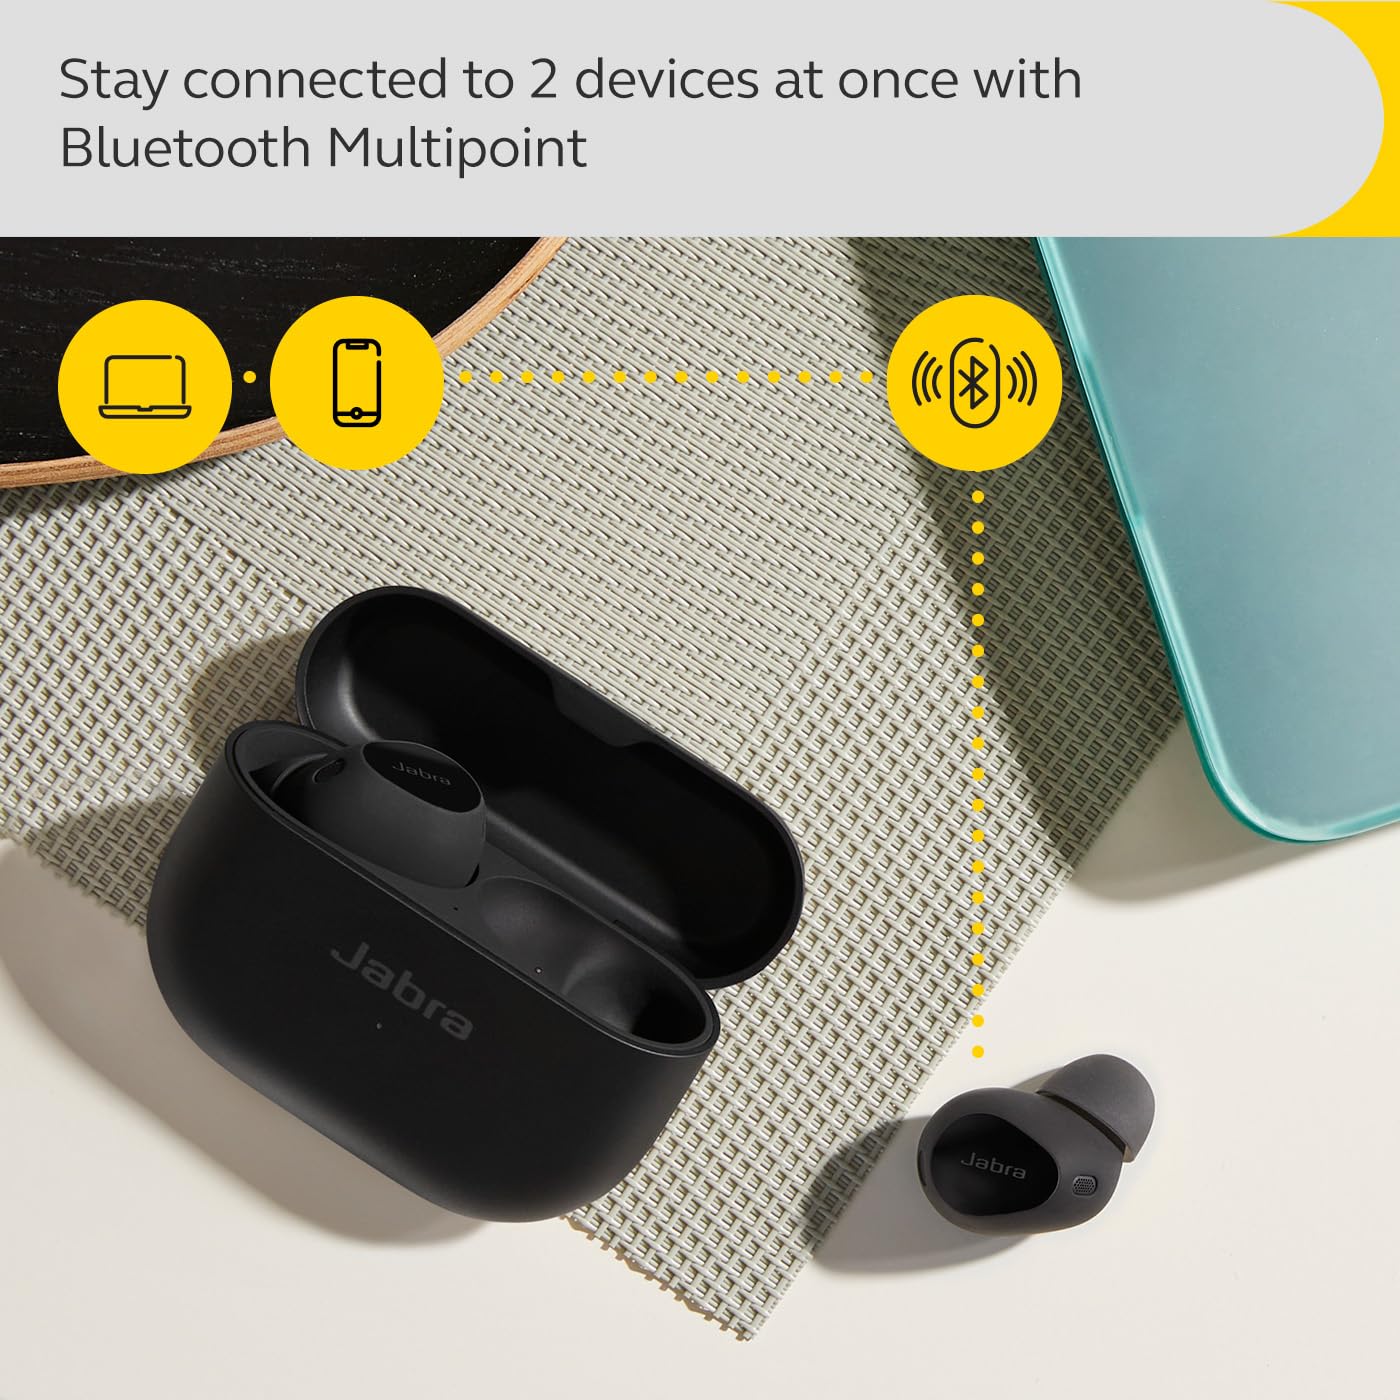 Jabra Elite 10 True Wireless Earbuds – Advanced Active Noise Cancelling Earbuds with Next-Level Dolby Atmos Surround Sound –All-Day Comfort, Multipoint Bluetooth, Wireless Charging – Gloss Black